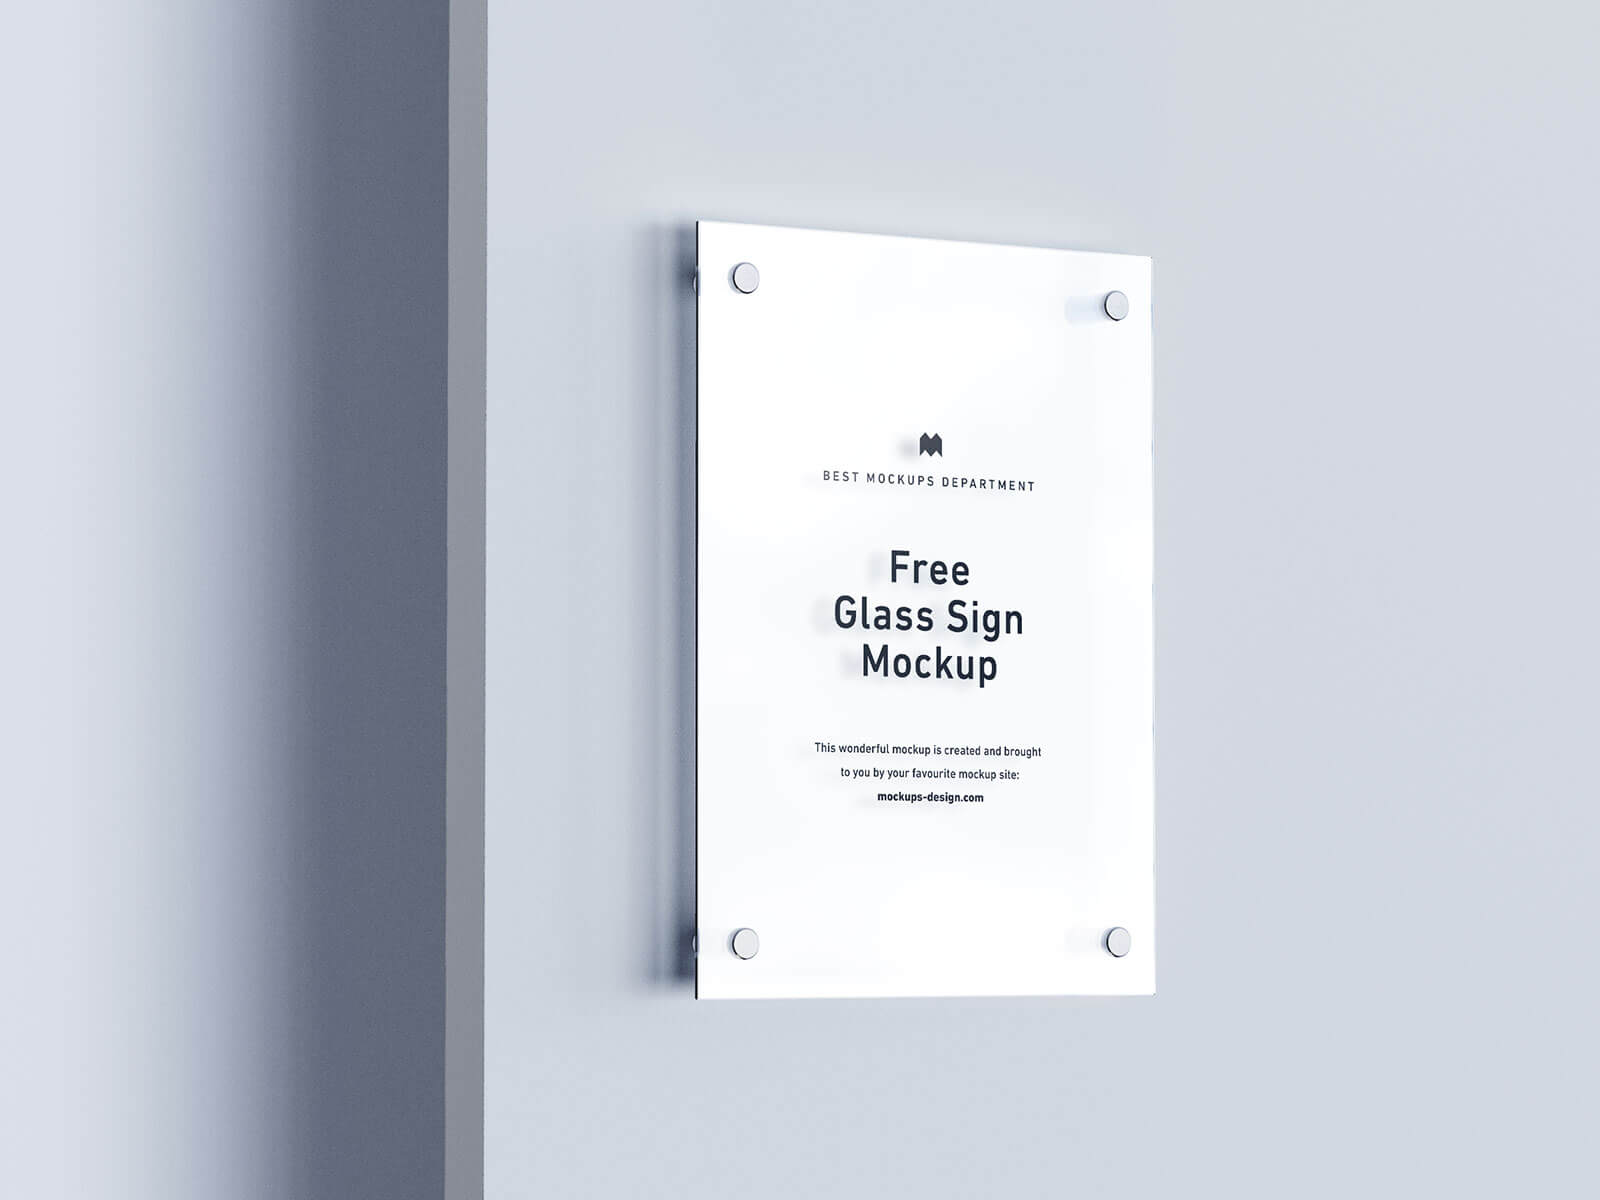 Free Wall Mounted Etched Glass Sign Mockup PSD Set